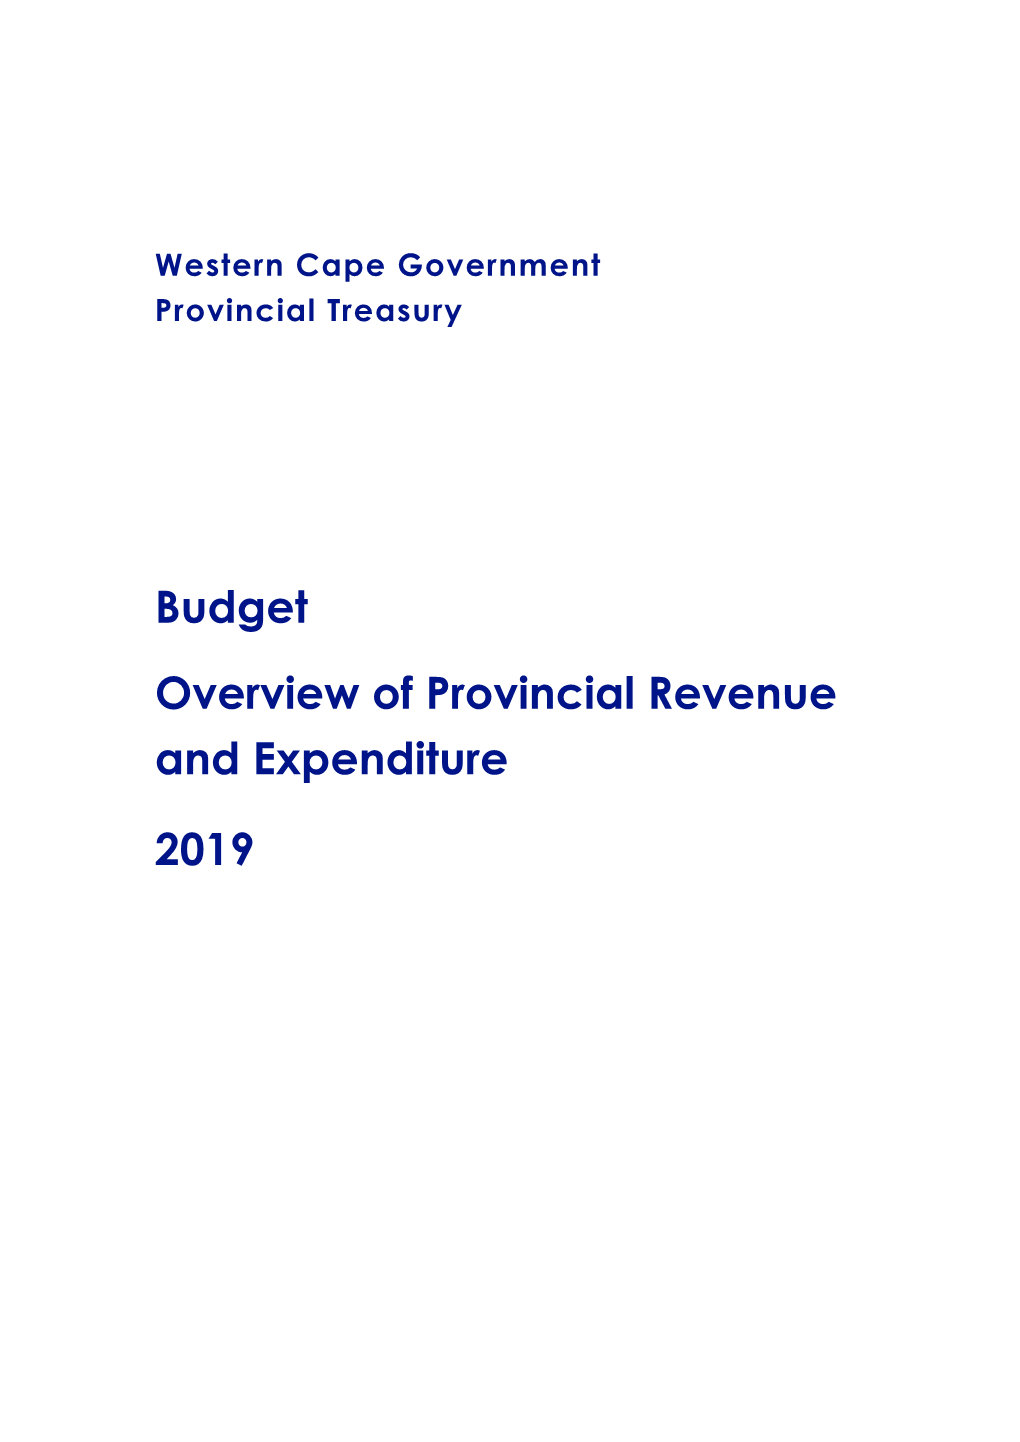 Budget Overview of Provincial Revenue and Expenditure 2019